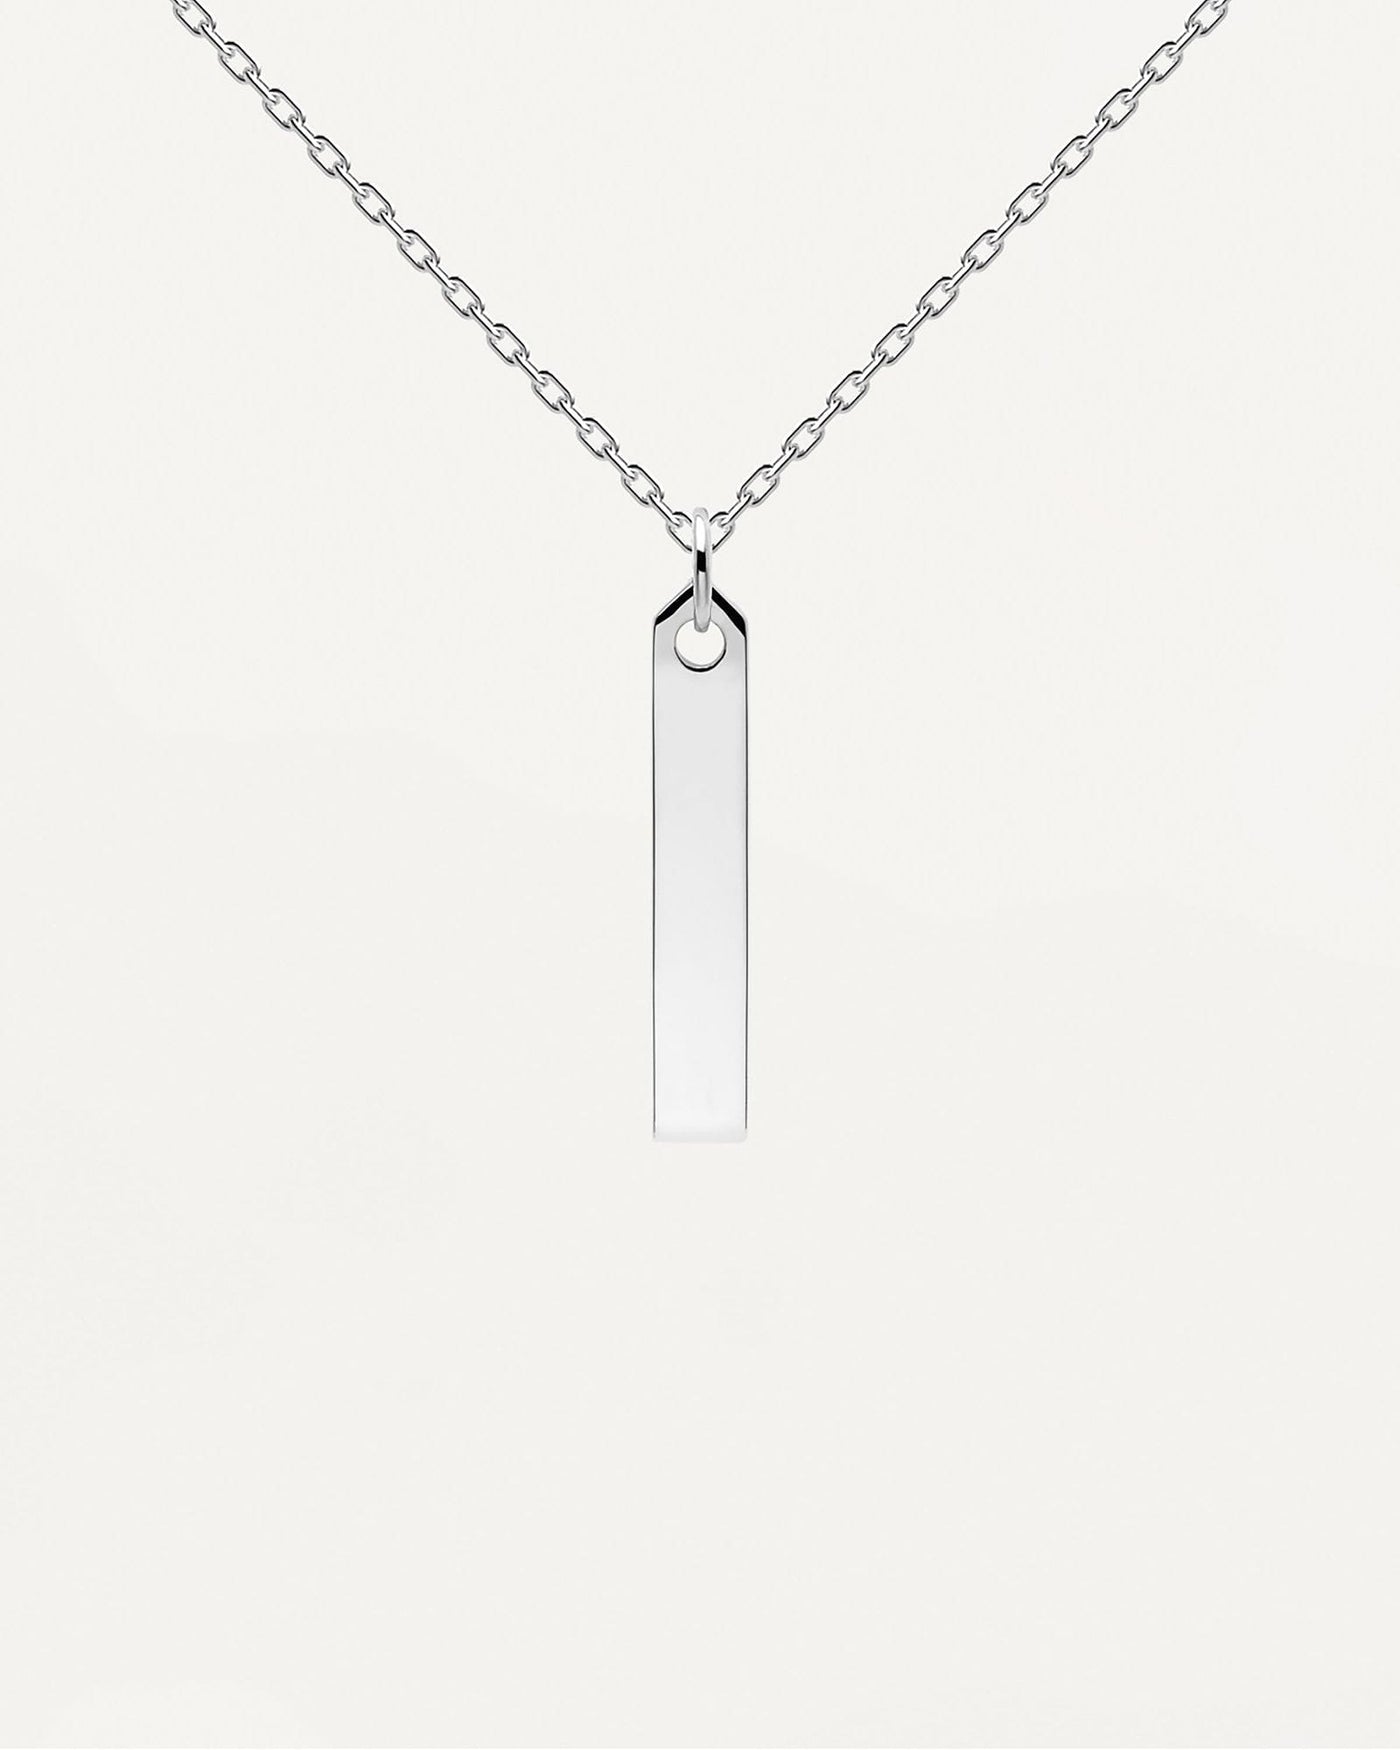 2024 Selection | Flame Silver Necklace. Sterling silver necklace with thin plate pendant to custom engrave. Get the latest arrival from PDPAOLA. Place your order safely and get this Best Seller. Free Shipping.